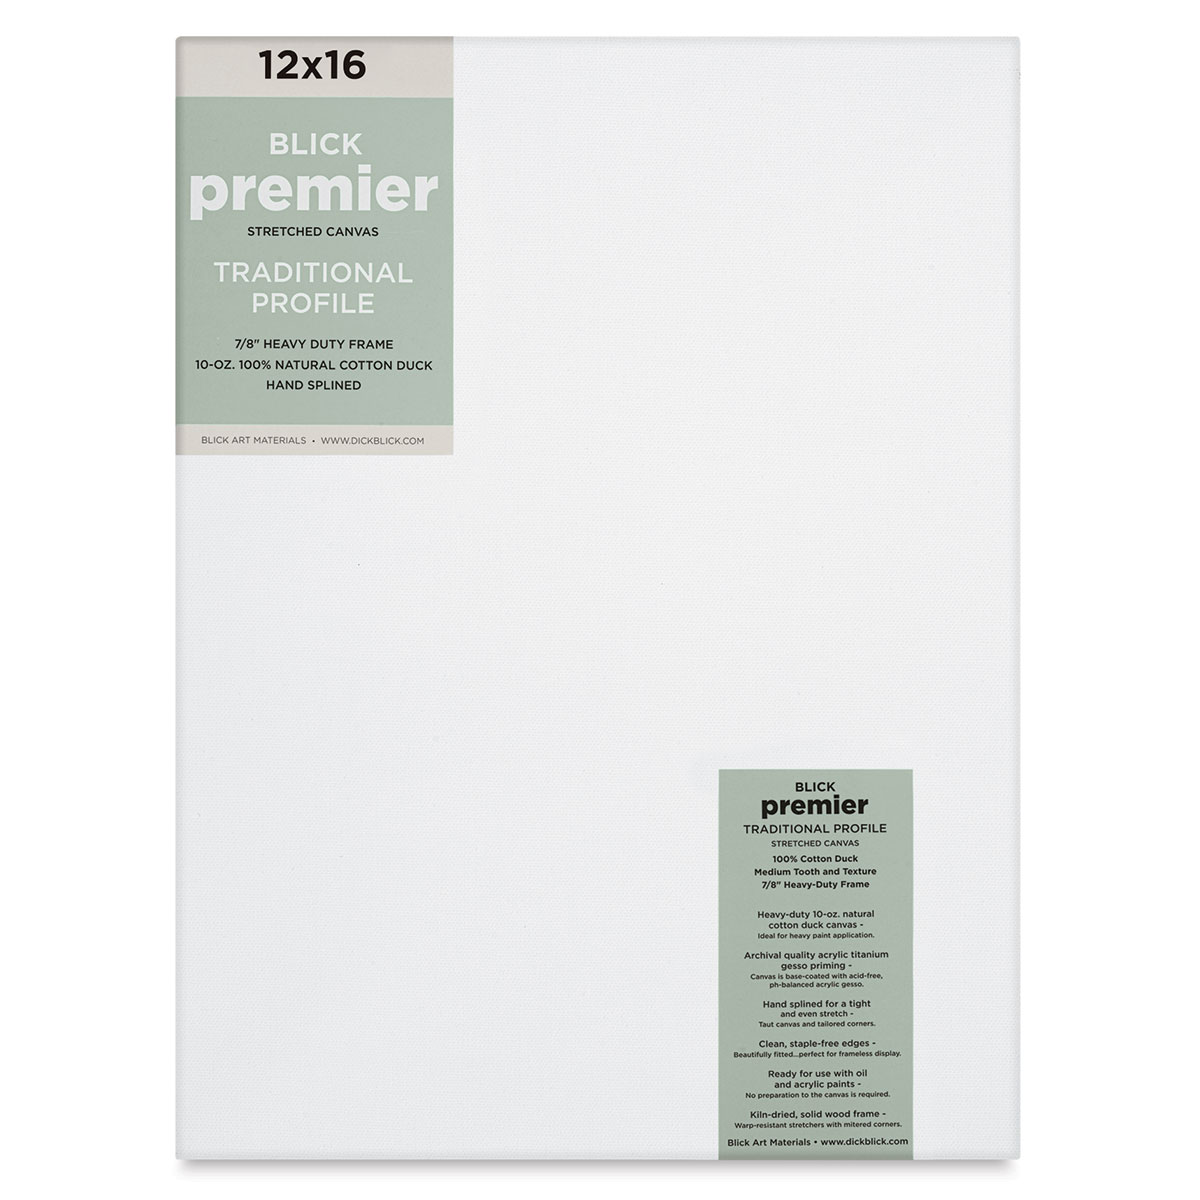 Blick Super Value Canvas Pack - 12 inch x 16 inch, Pkg of 6